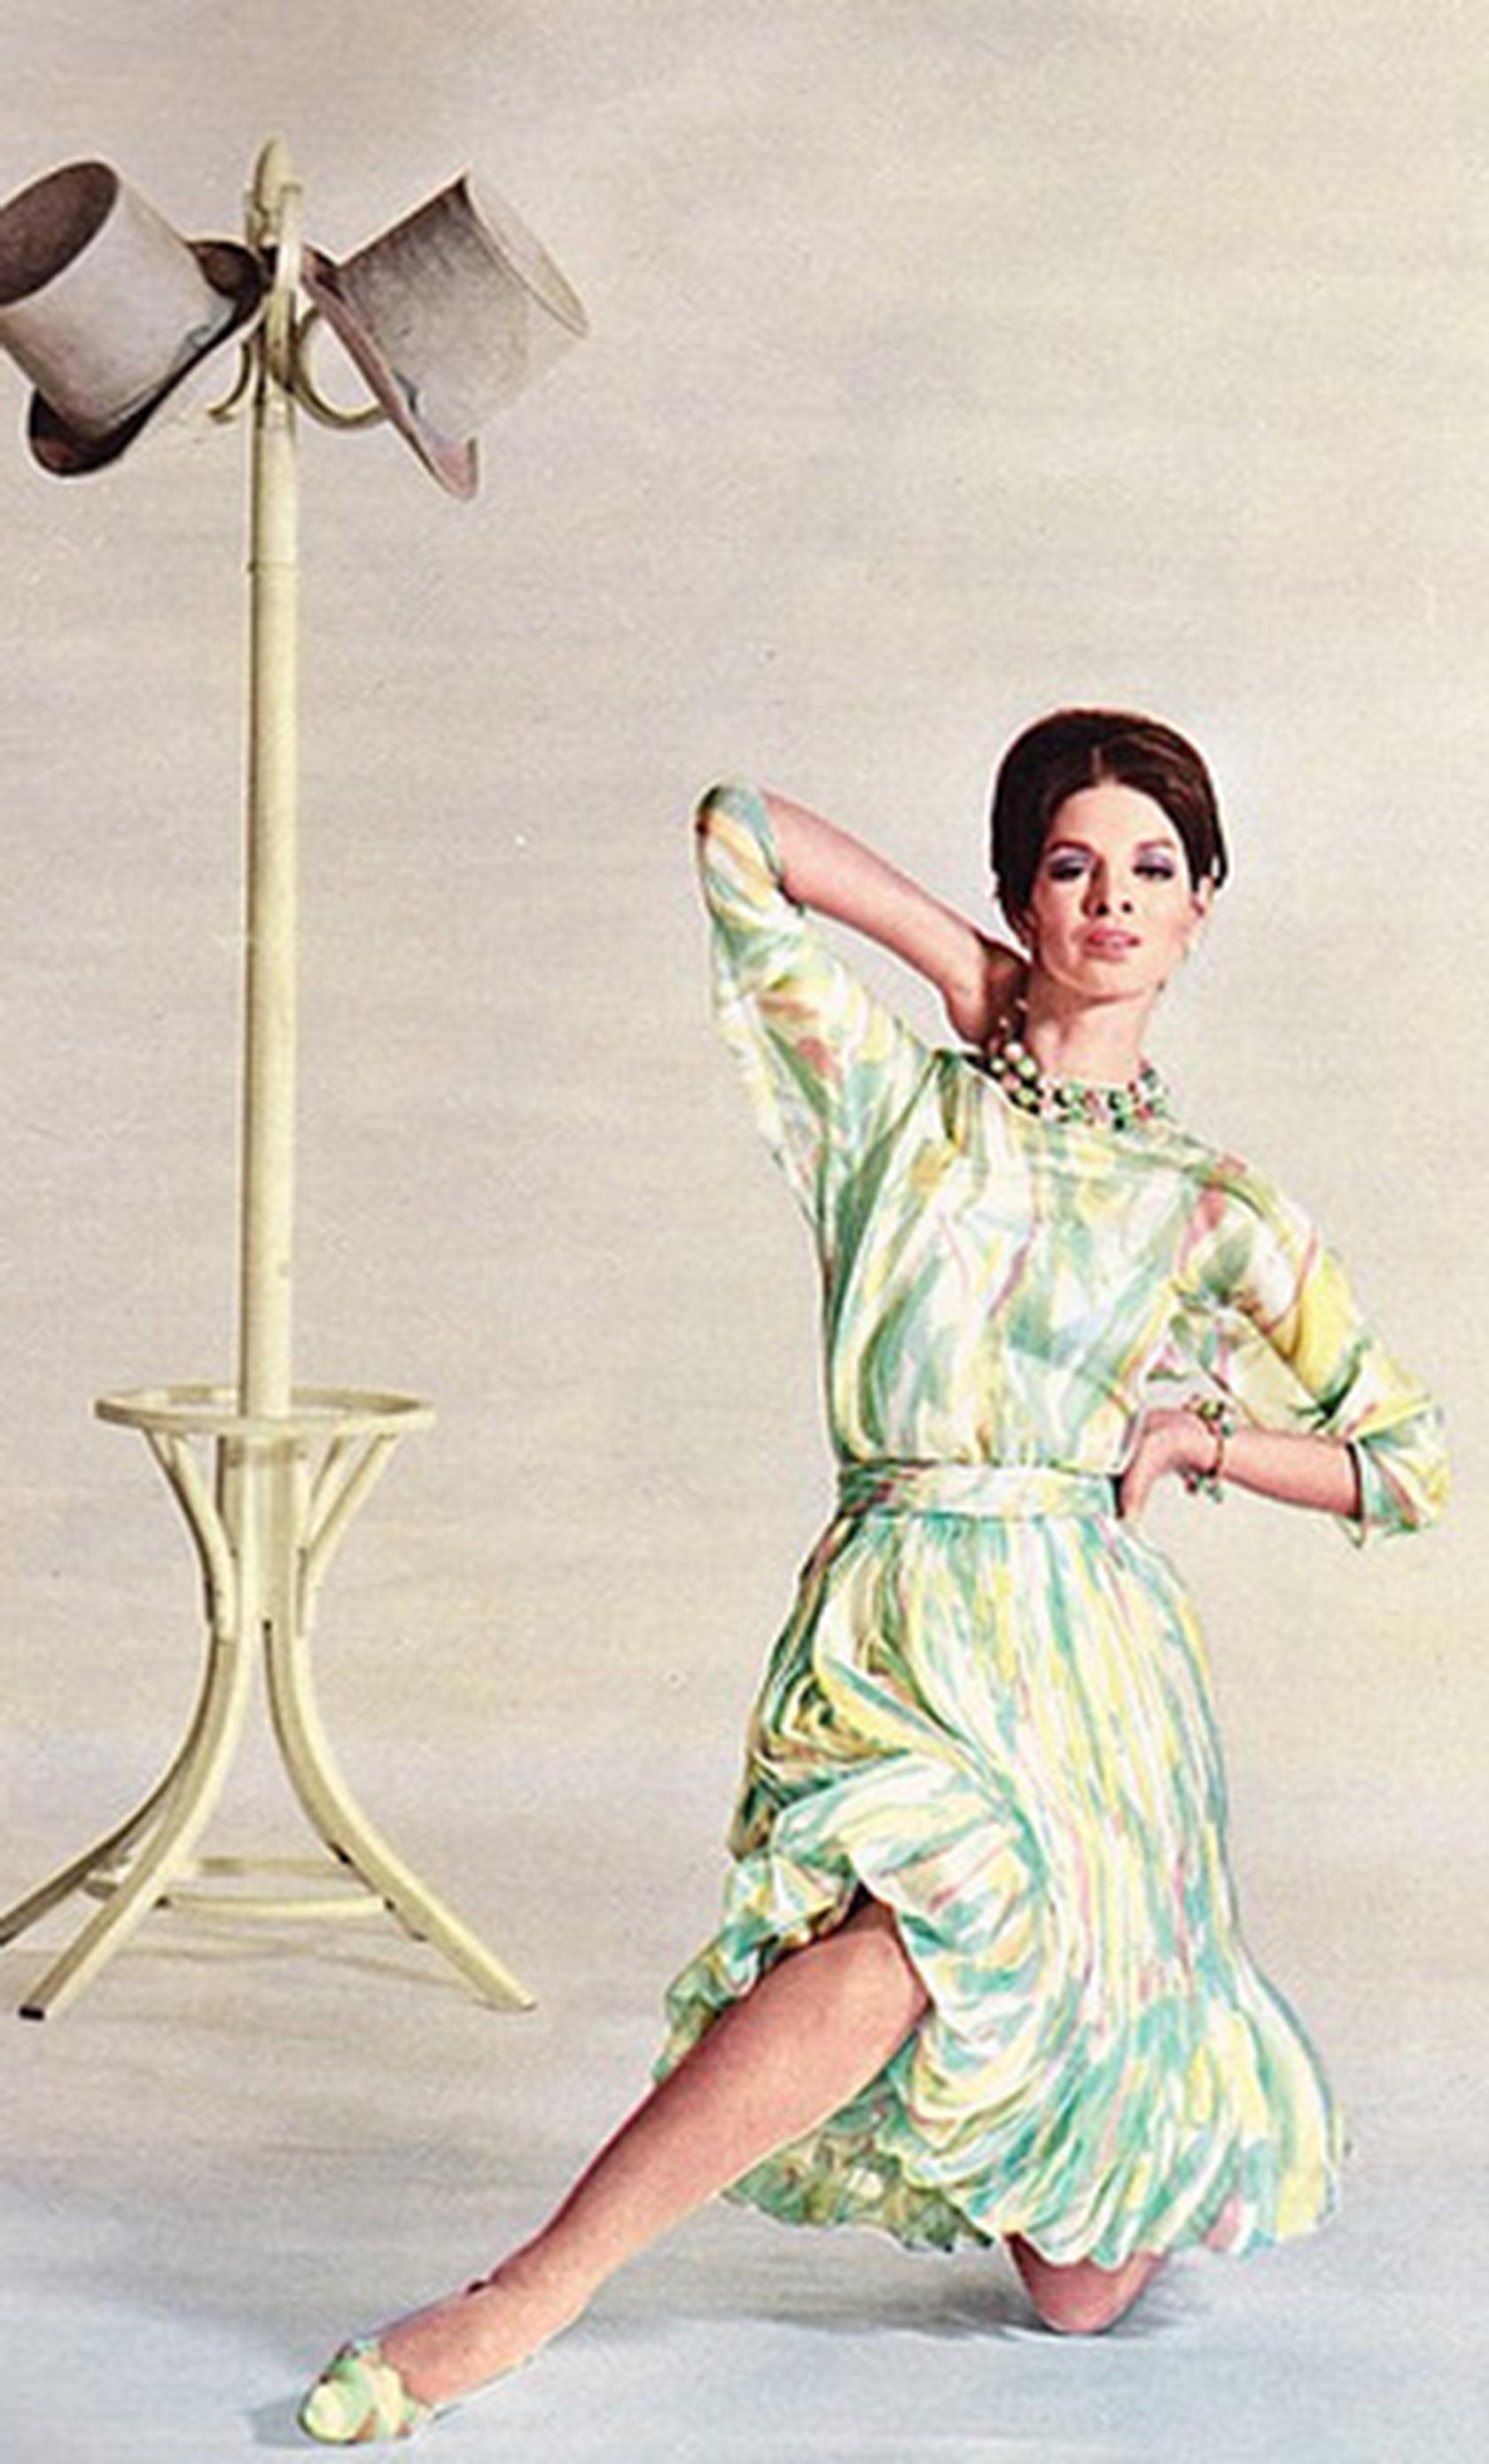 A stunning piece of haute couture, this Marc Bohan by Dior dress was photographed for L’Officiel in 1965. Constructed in sheer silk chiffon in pastel shades of green, pink, yellow and ivory, the dress has a nude underdress with boned corset and the